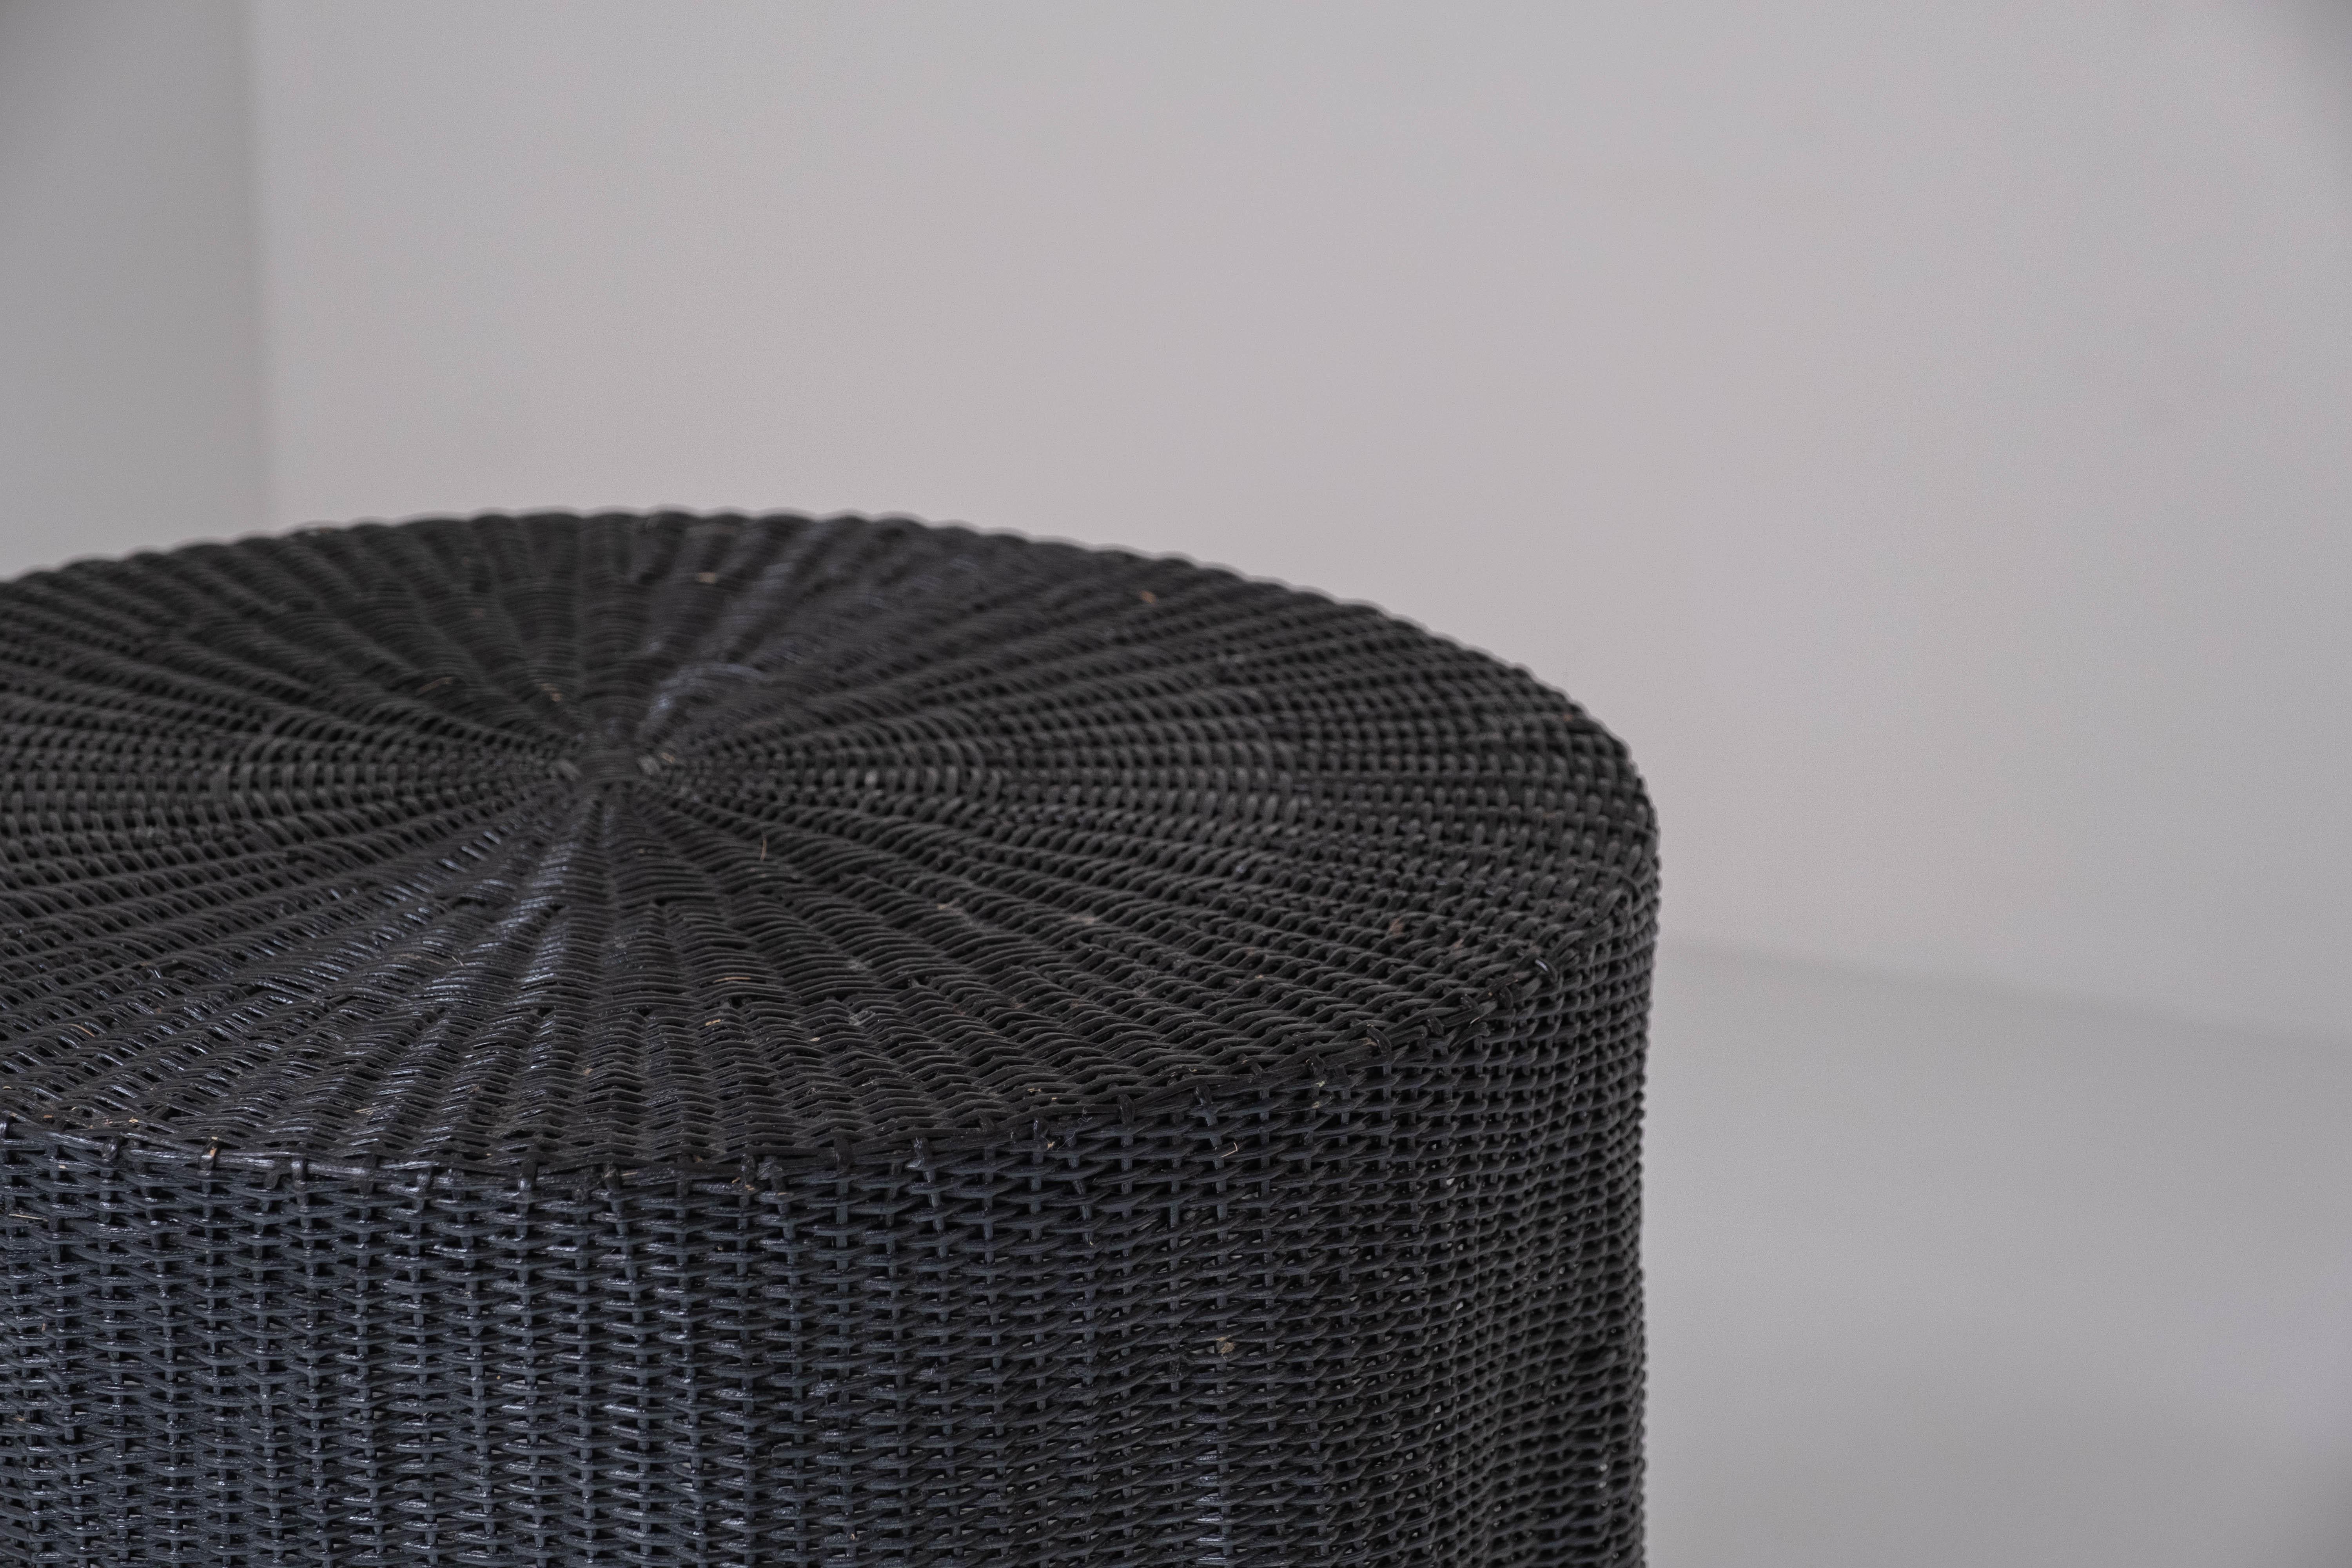 Late 20th Century Trompe L’oeil Wicker Side Table with ‘Draped’ Illusion from France, 1970s